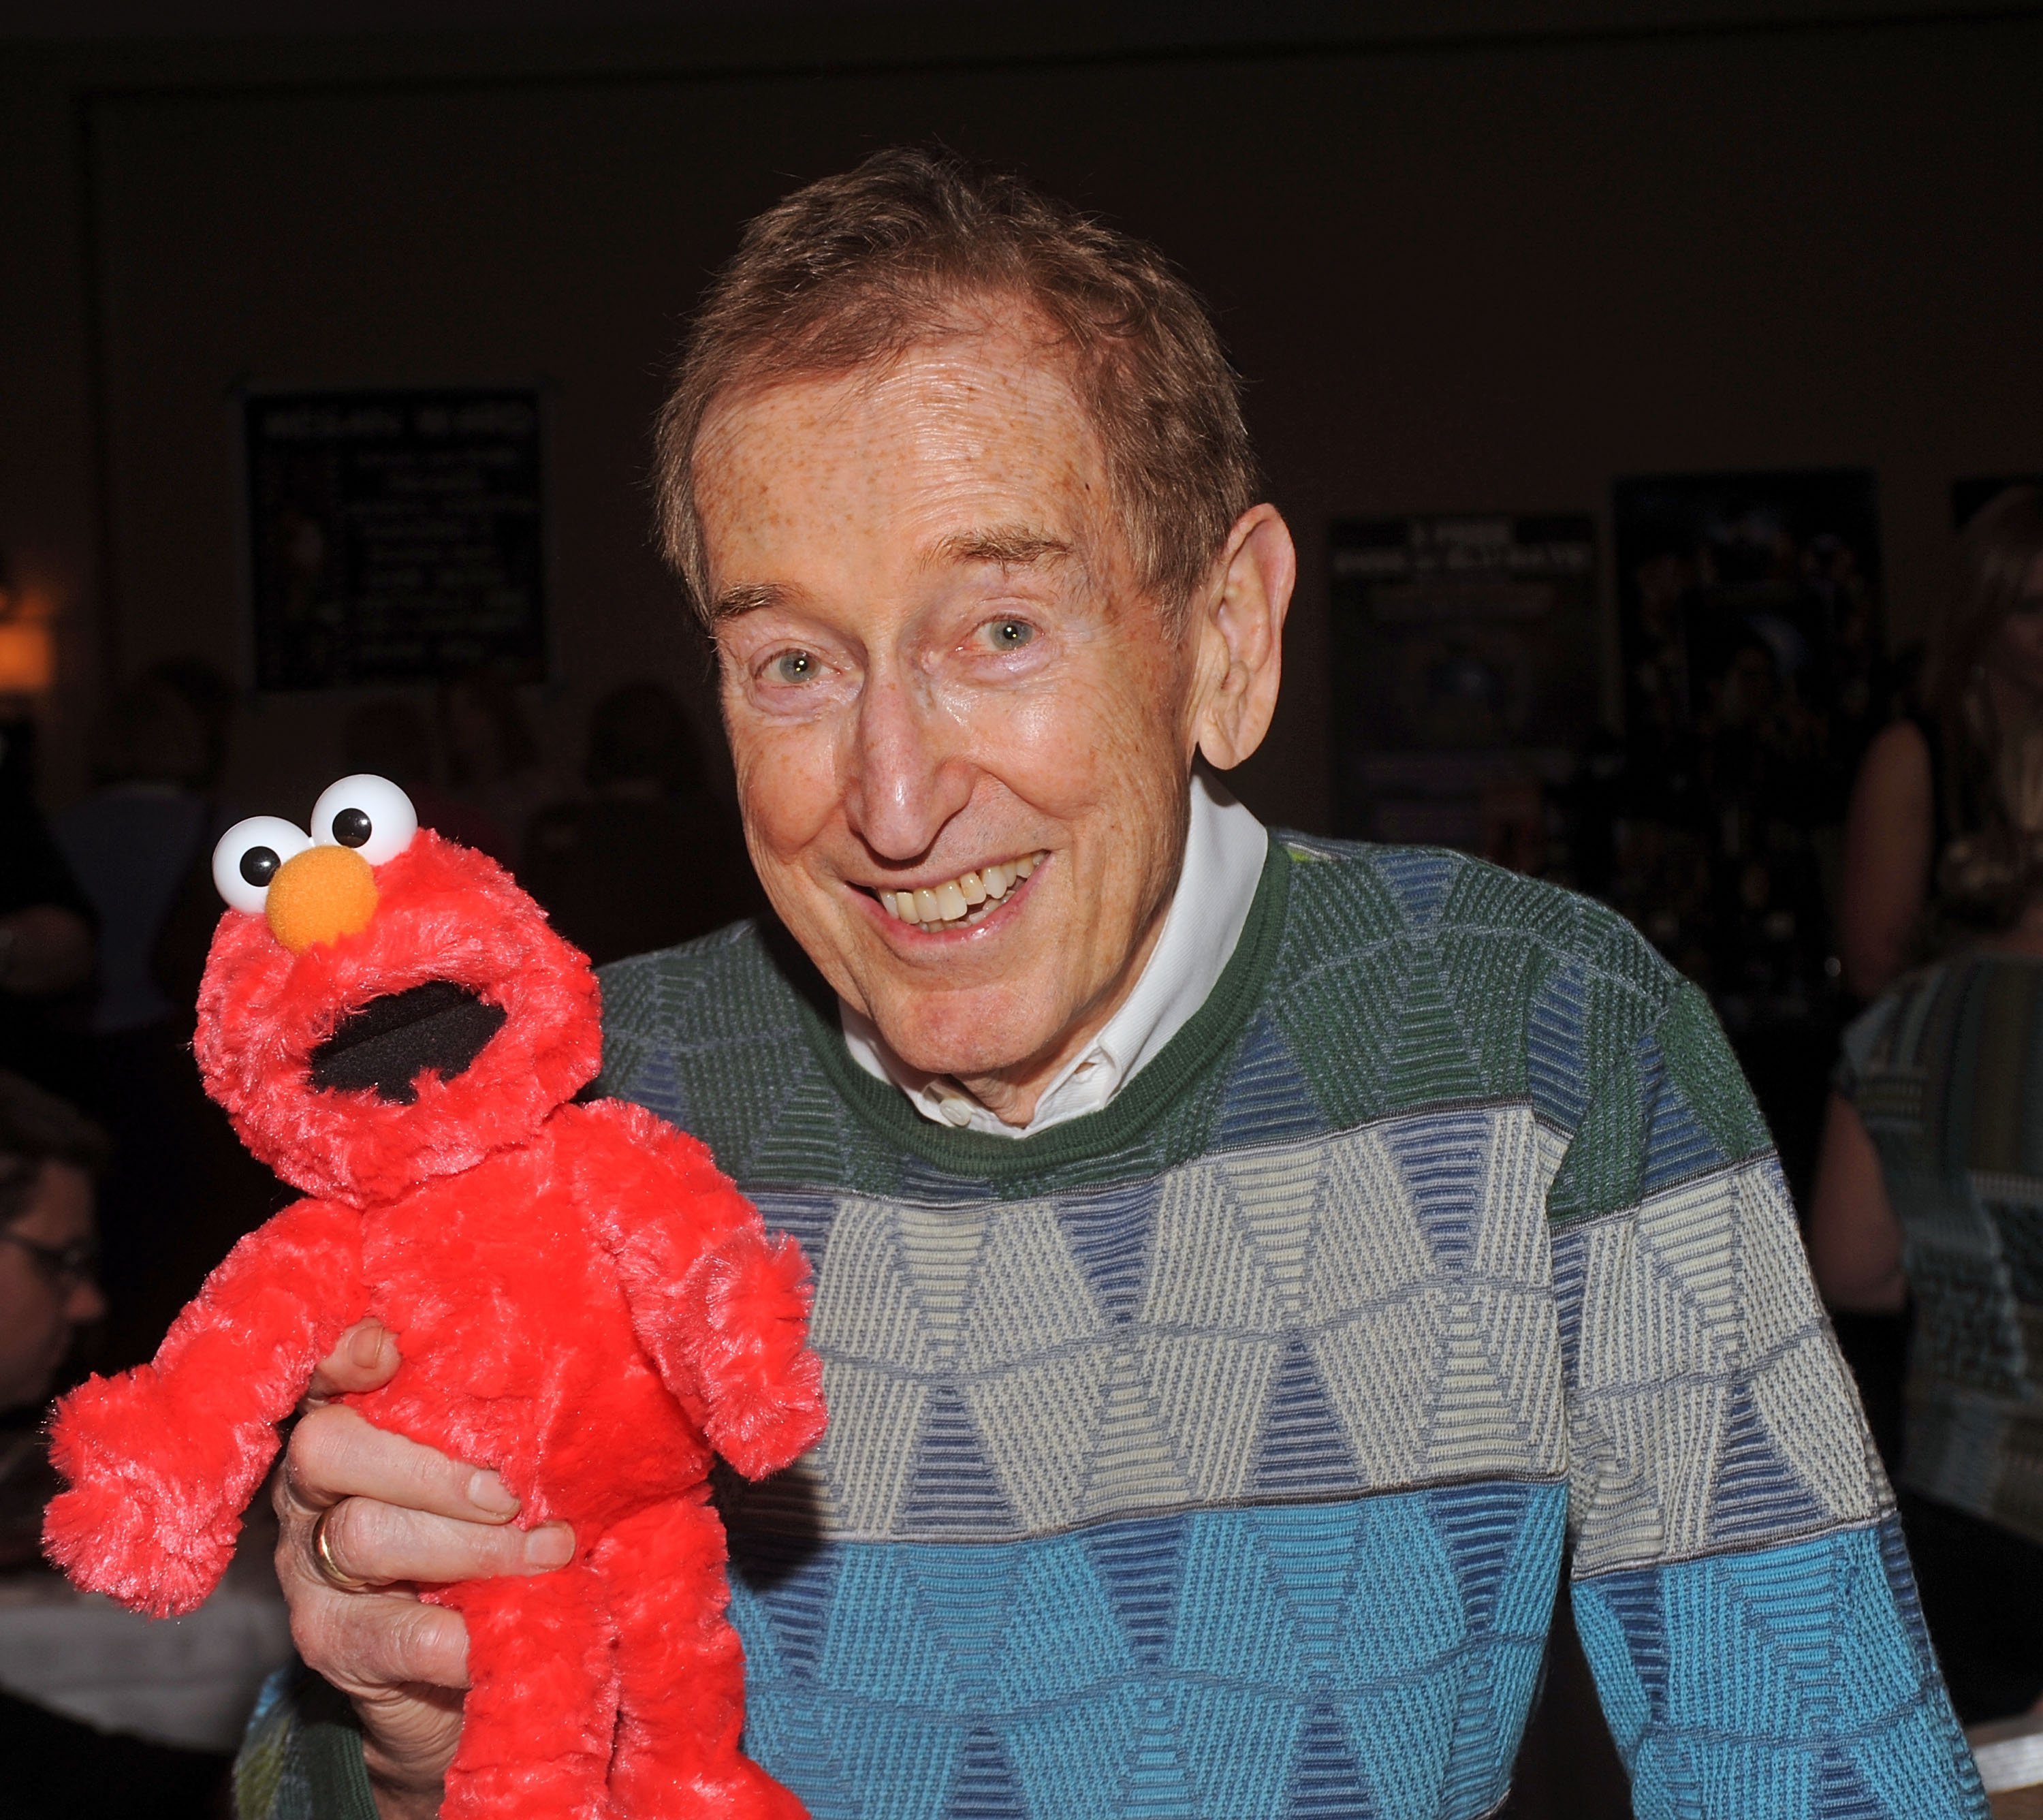 Bob McGrath at the Chiller Theatre Expo at the Sheraton Parsippany Hotel on April 25, 2014, in Parsippany, New Jersey | Source: Getty Images